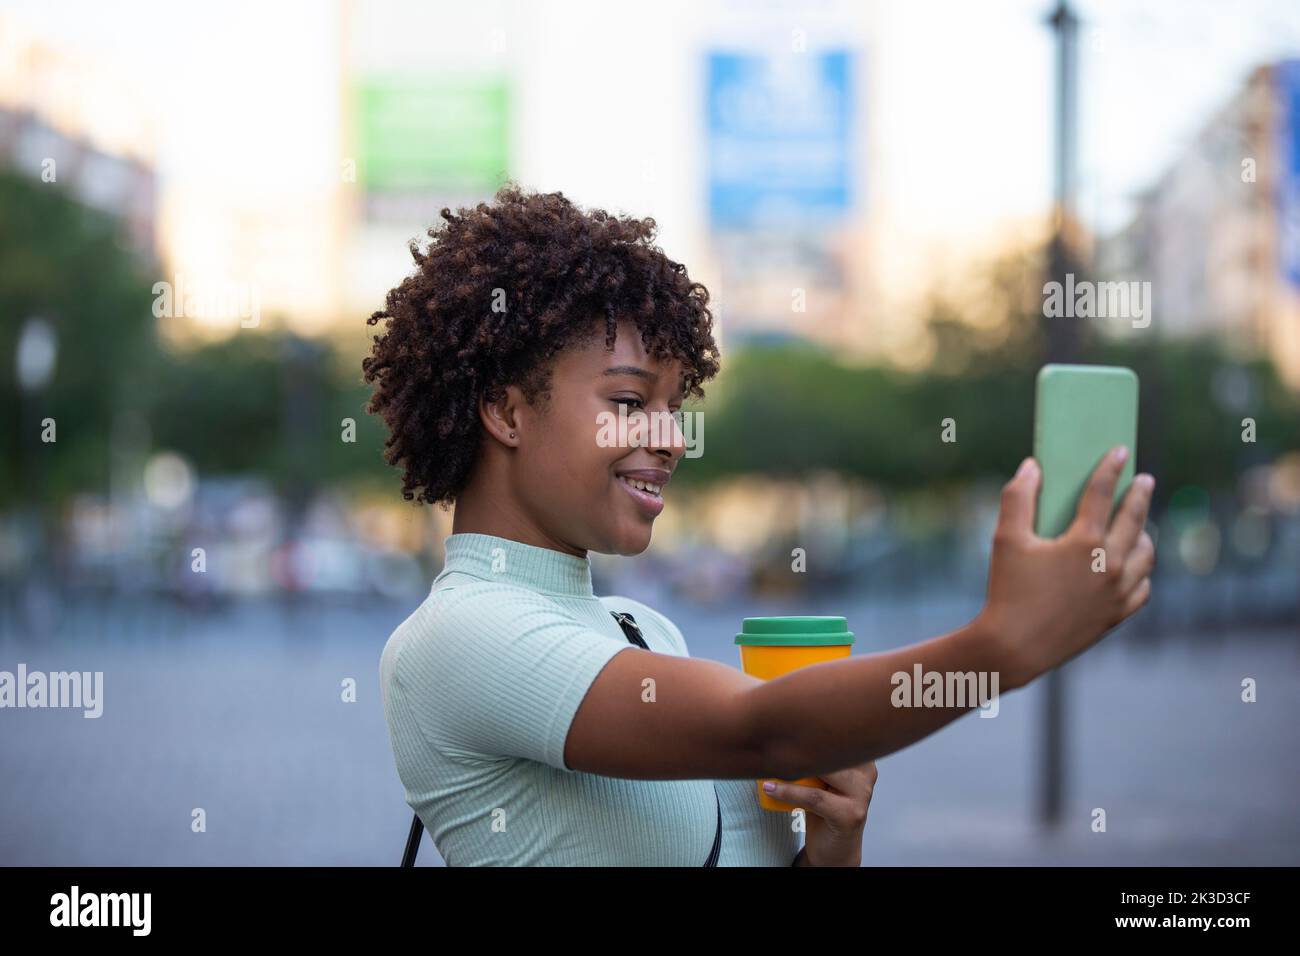 making selfie. Young woman with curly hair wearing fashionable clothes outdoors in the city. Stock Photo